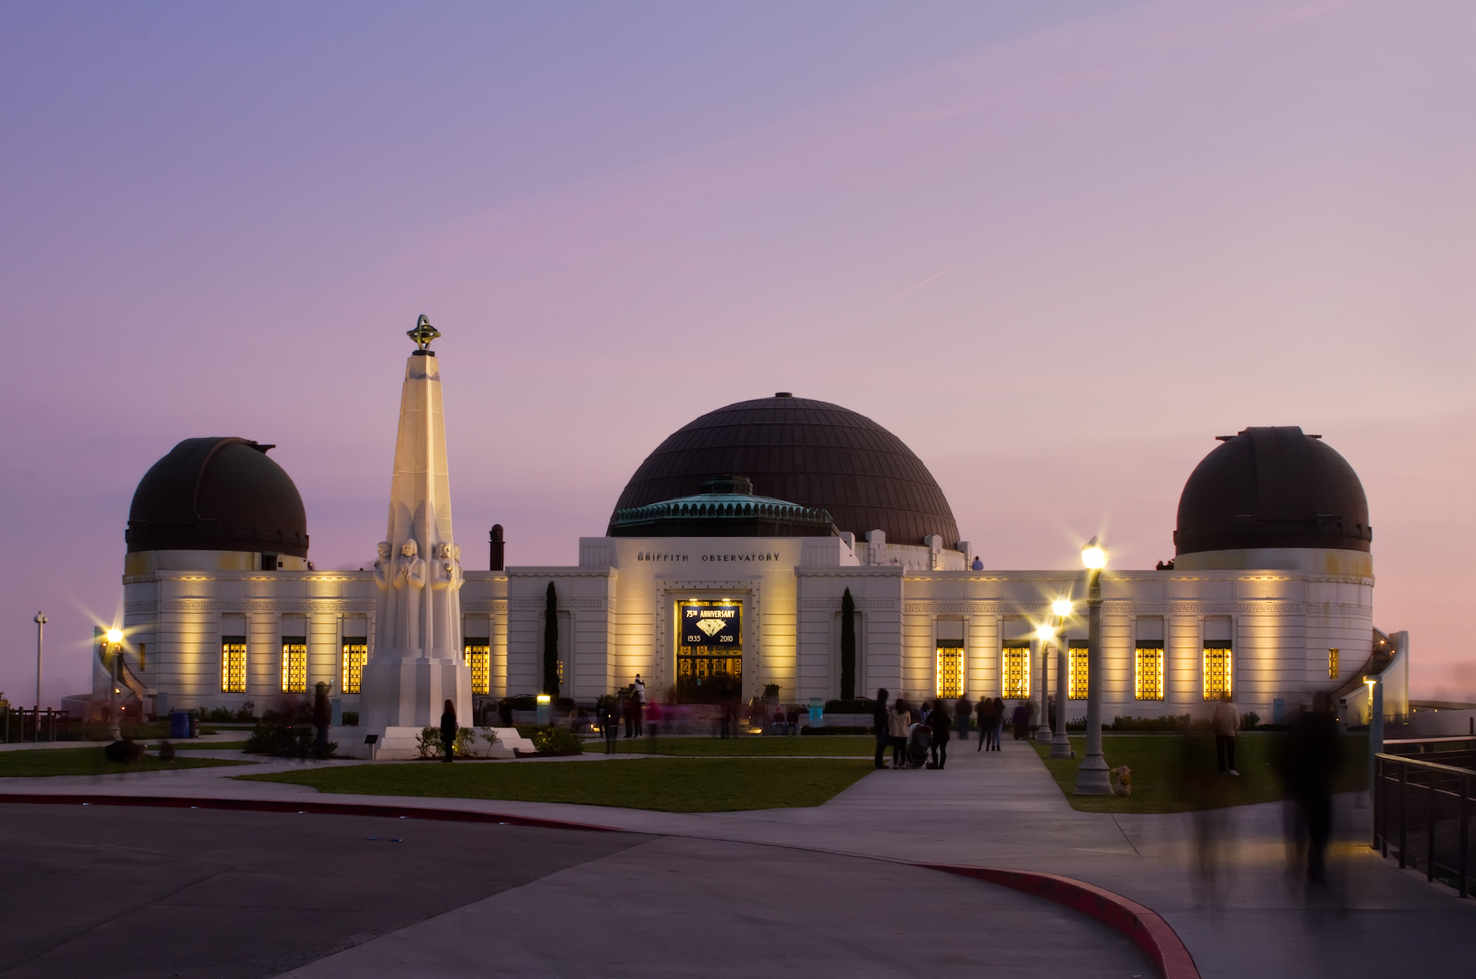 Large griffith observatory